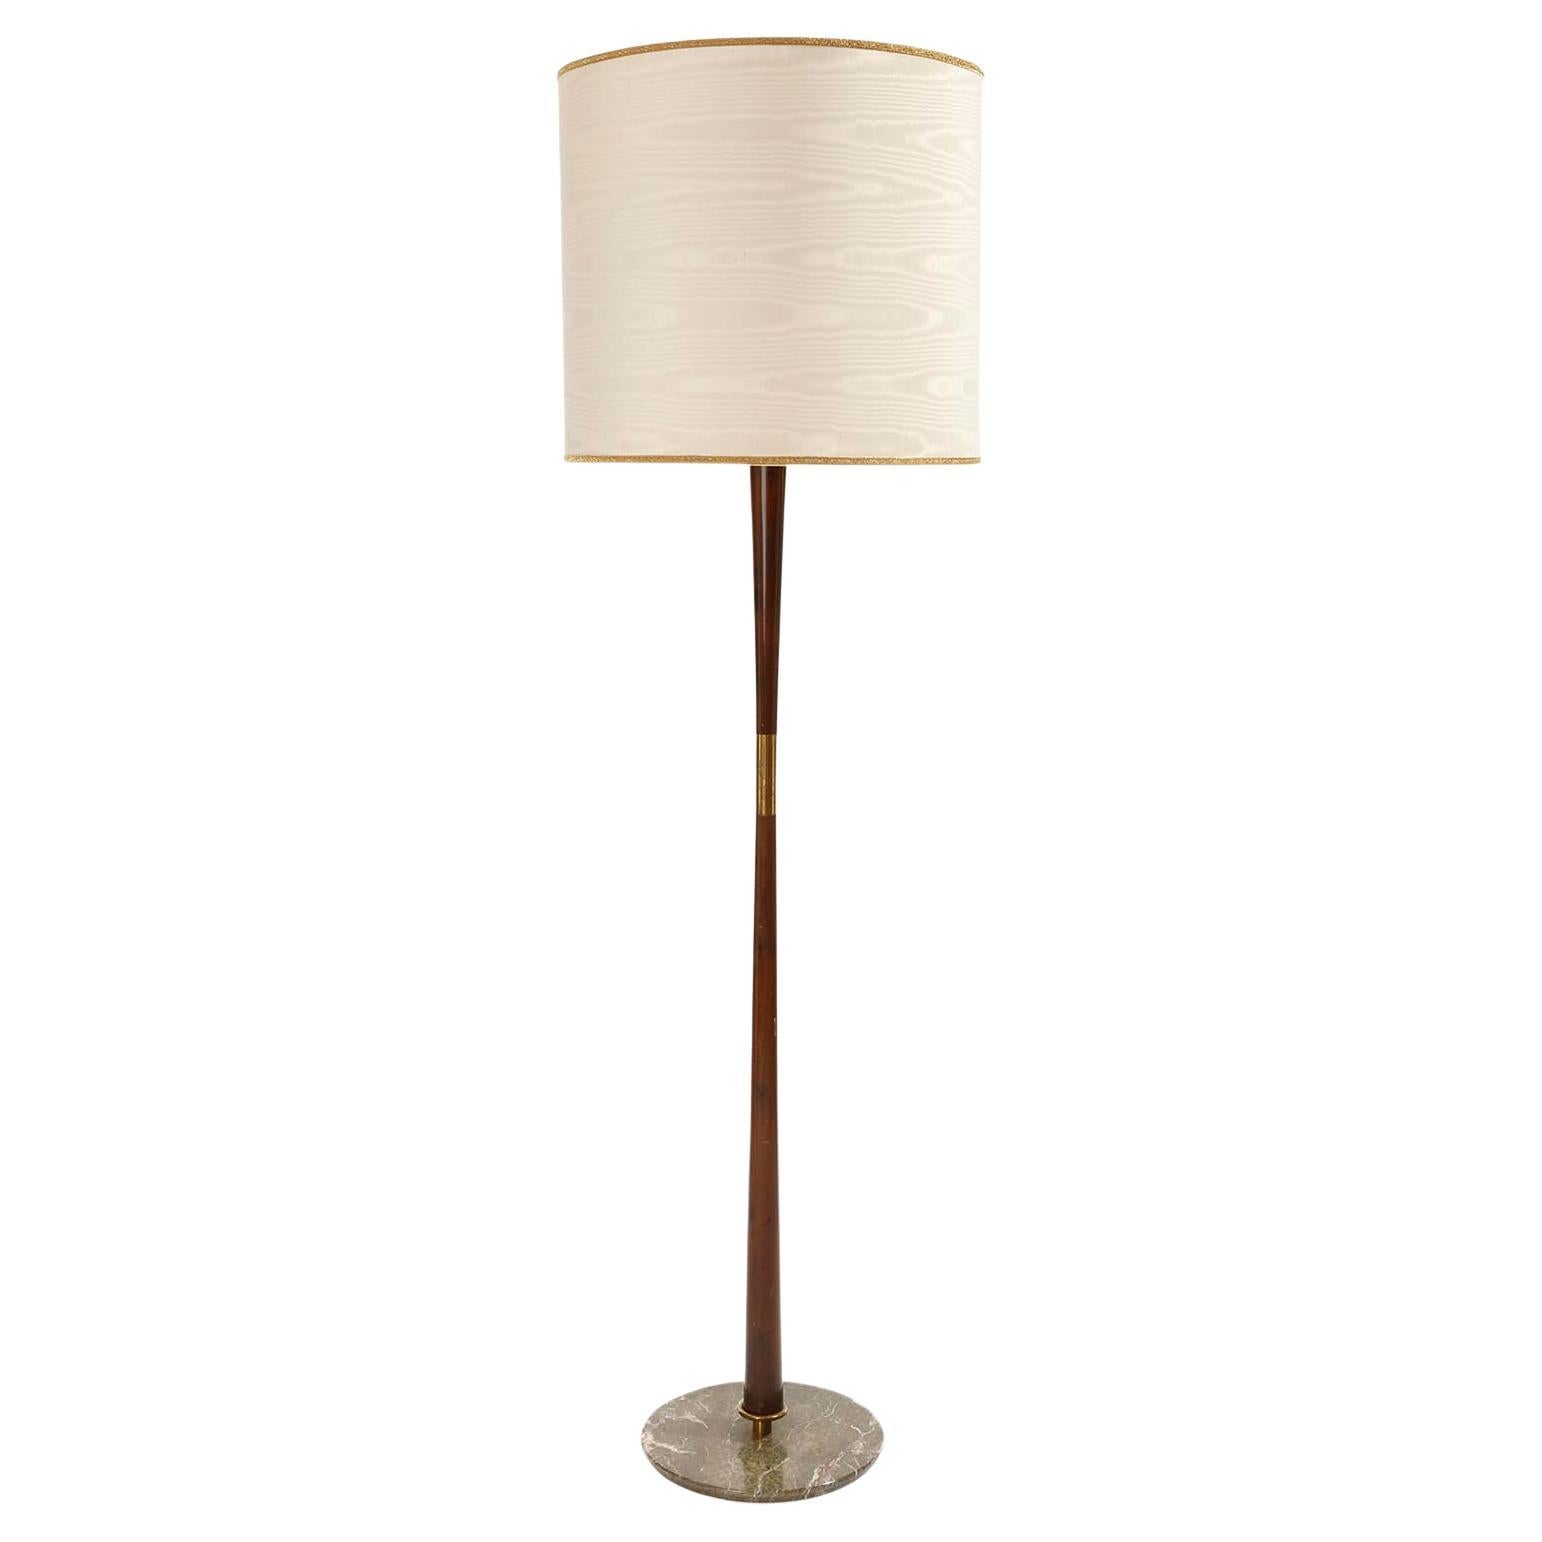 Floor Lamp by Stilnovo, Stained Walnut Brass Marble Base, circa 1946-48 For Sale